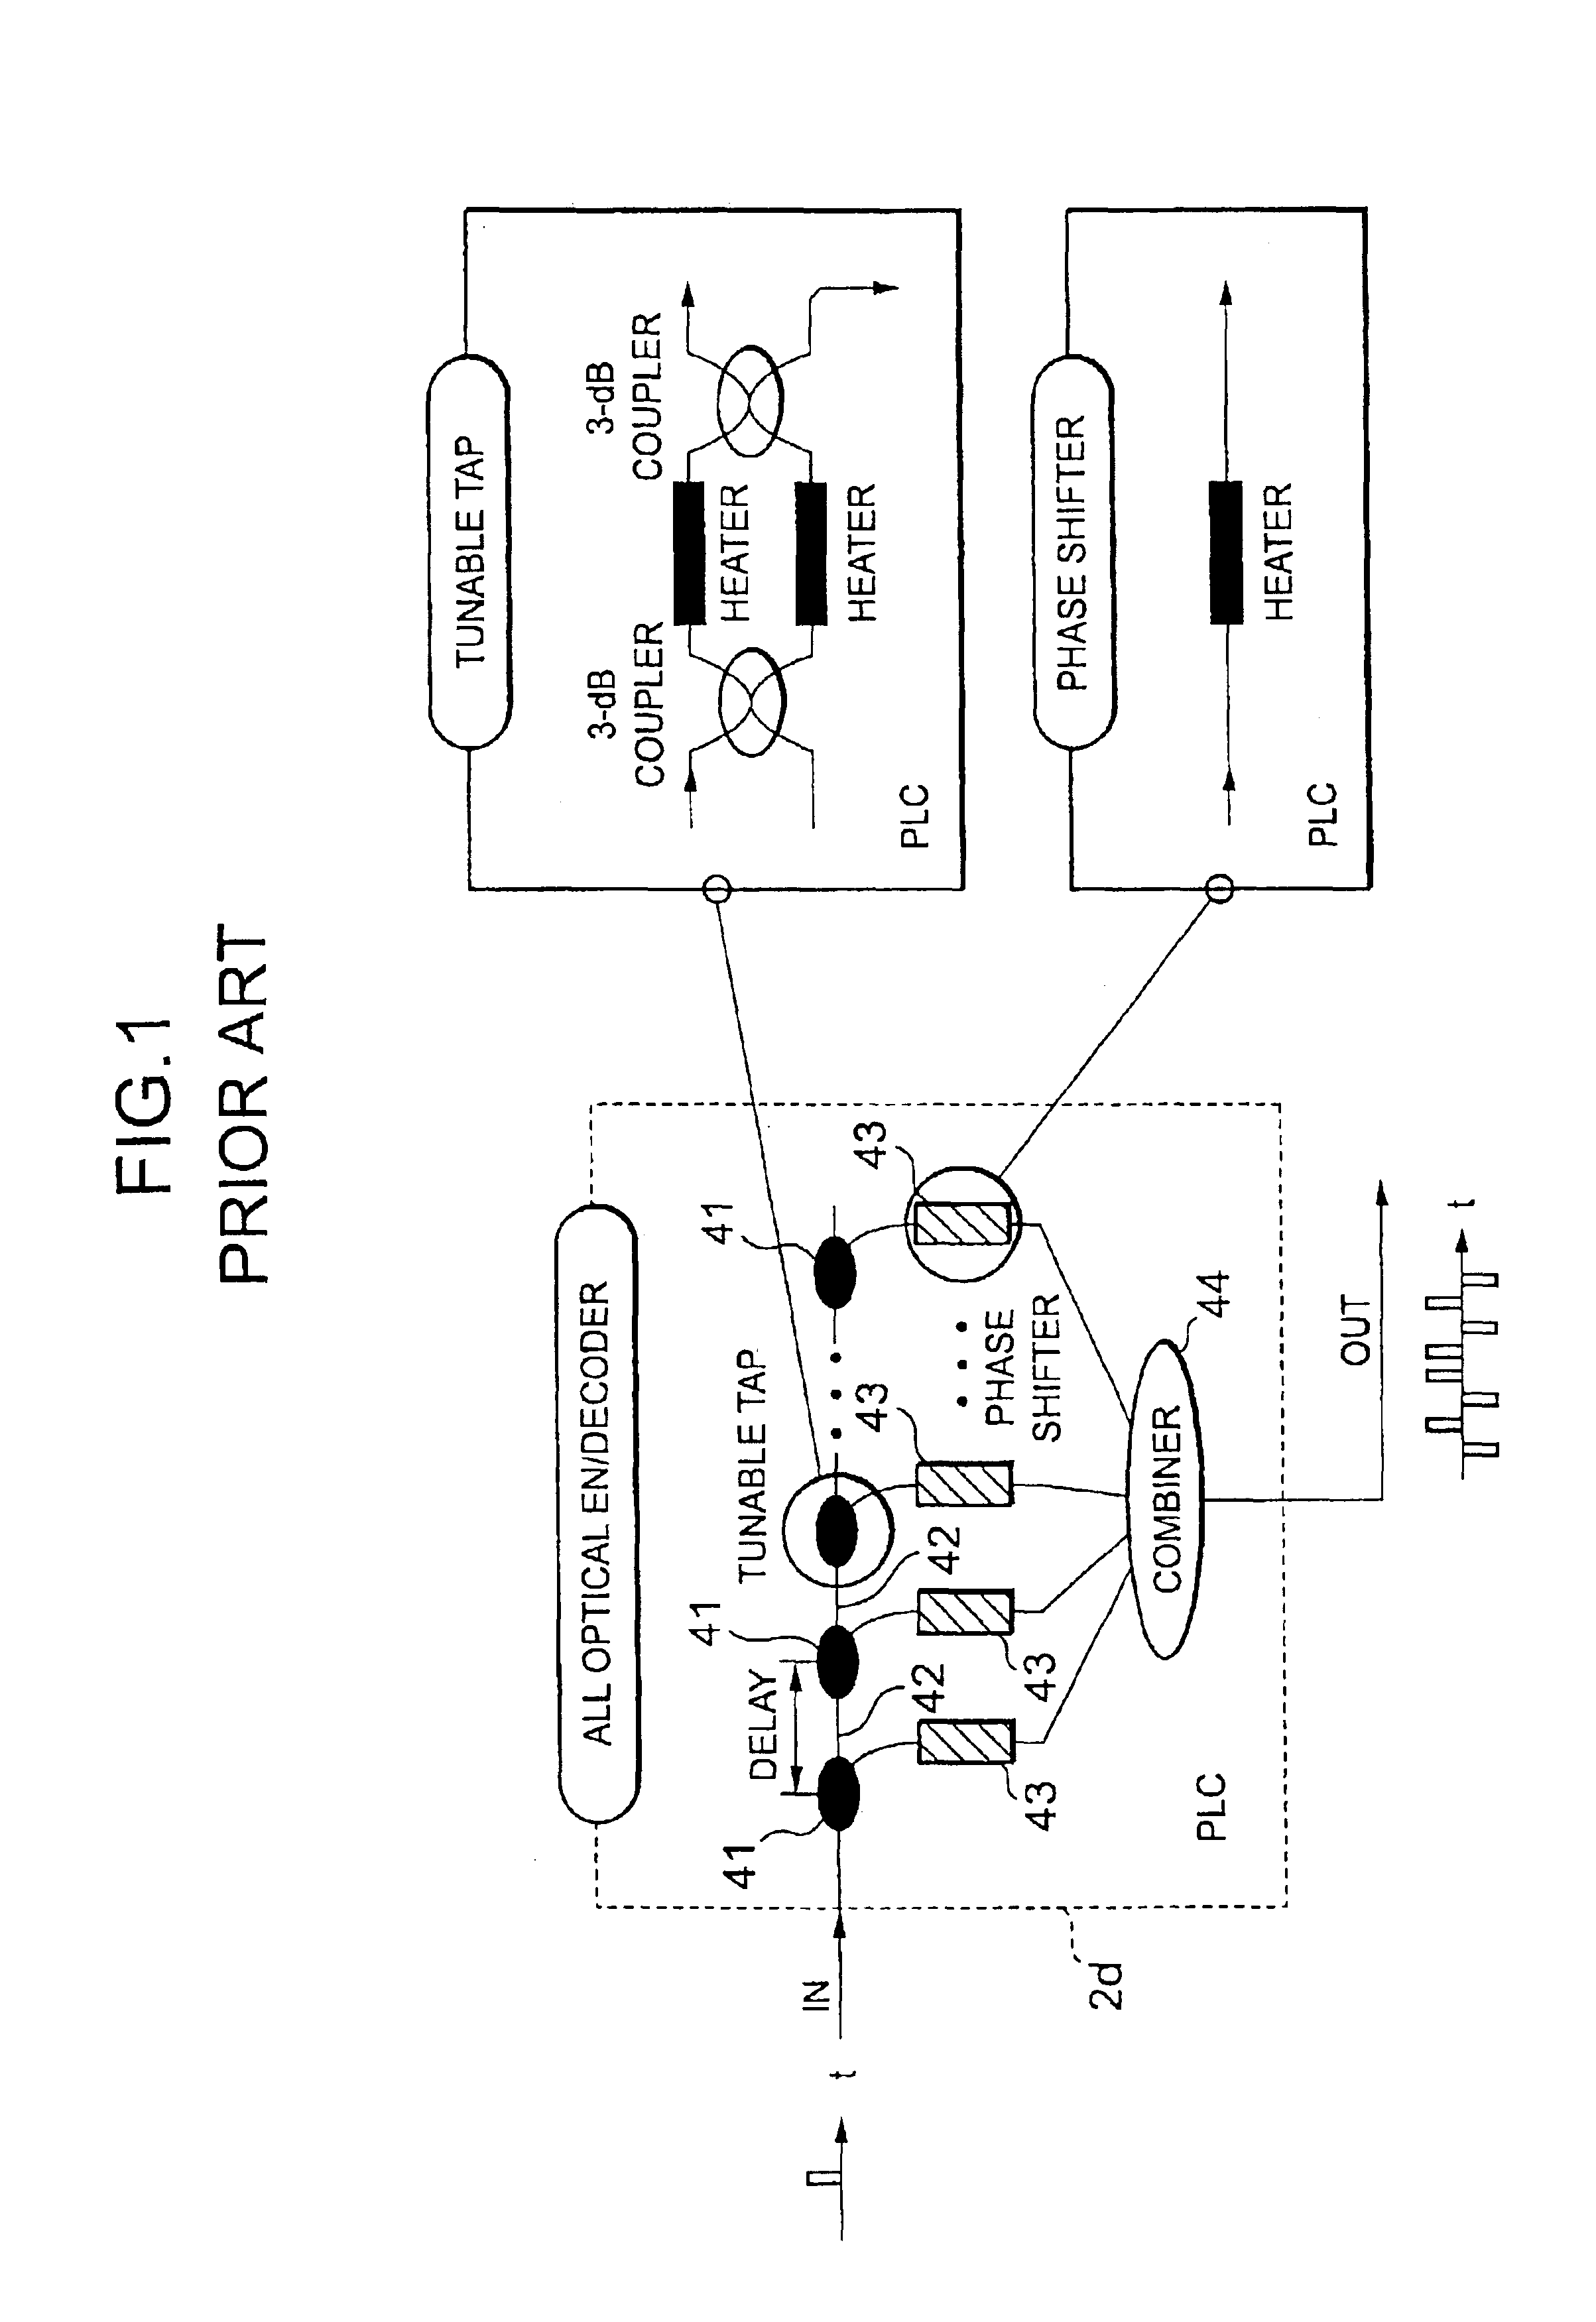 Optical packet header identifier, optical router incorporating the same therein, and optical routing method using the router